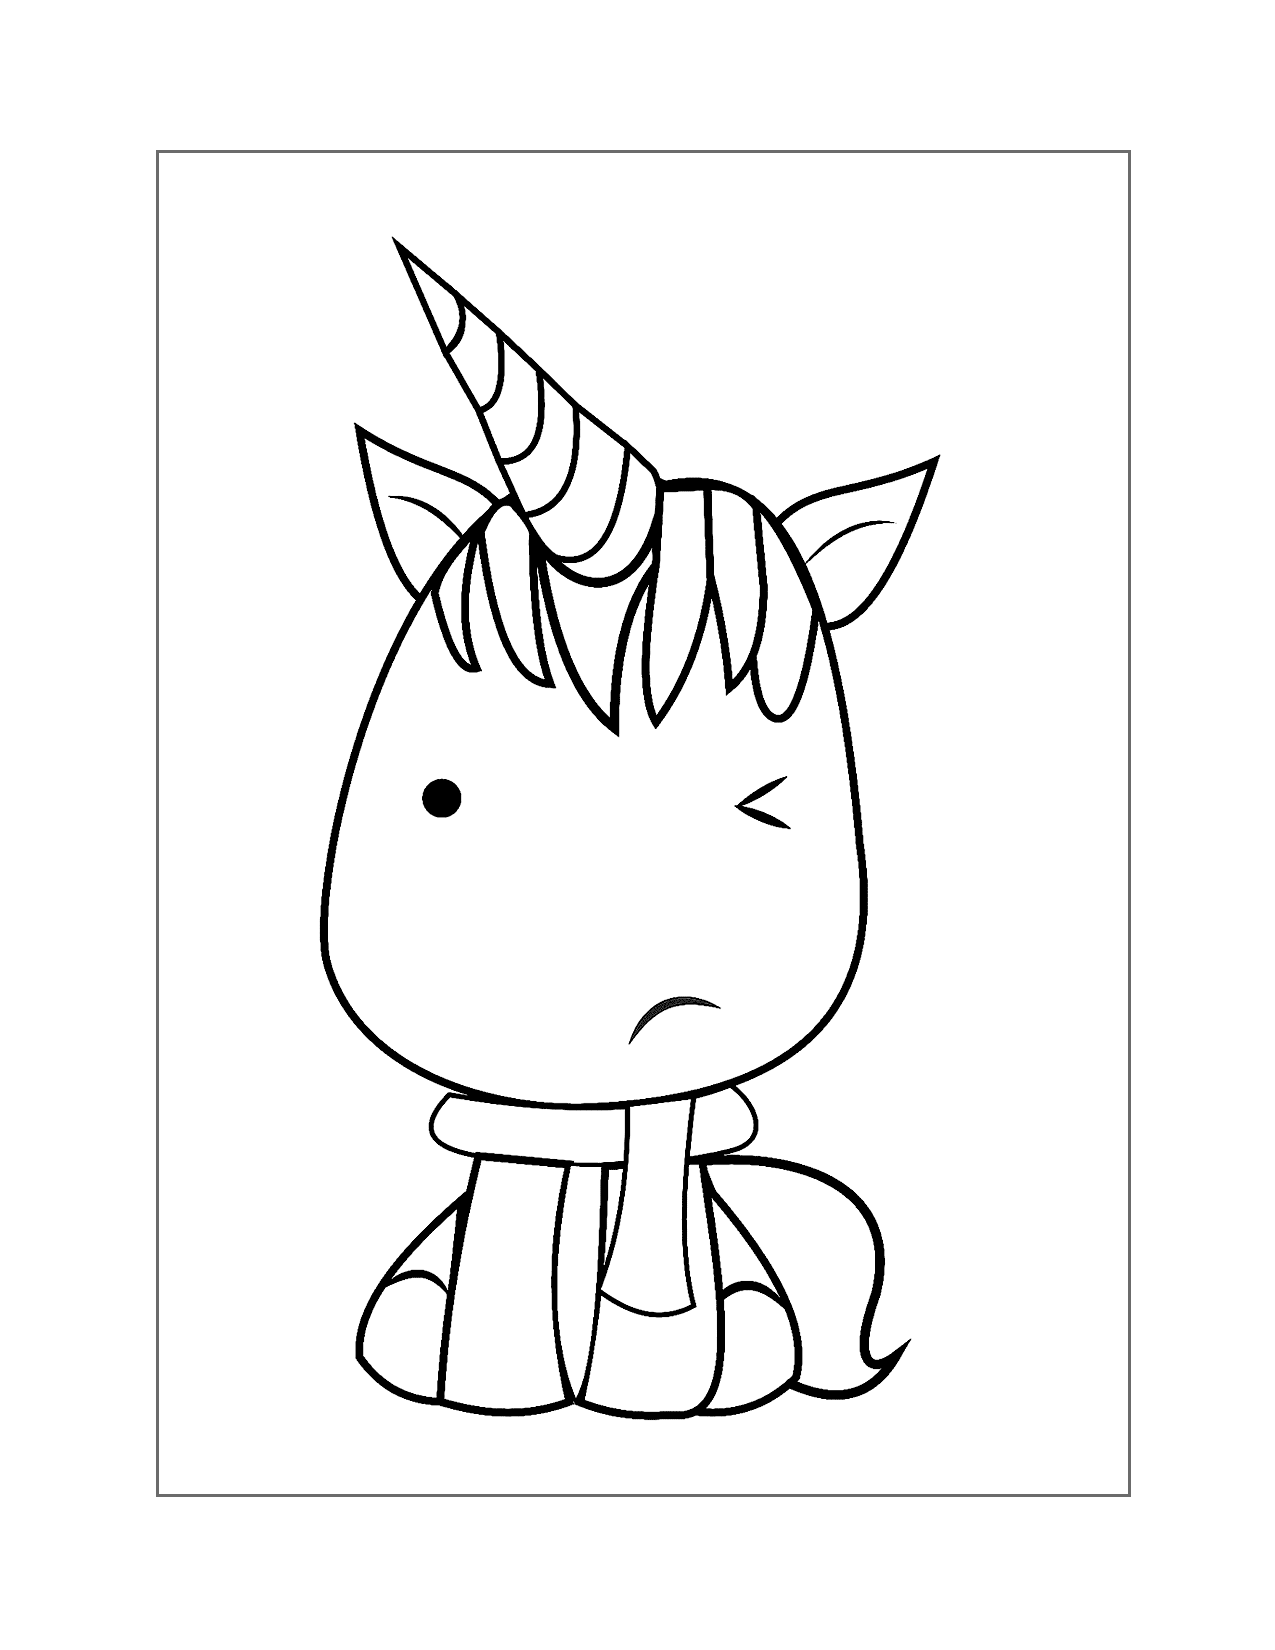 Cute Baby Cartoon Unicorn With Scarf Coloring Page